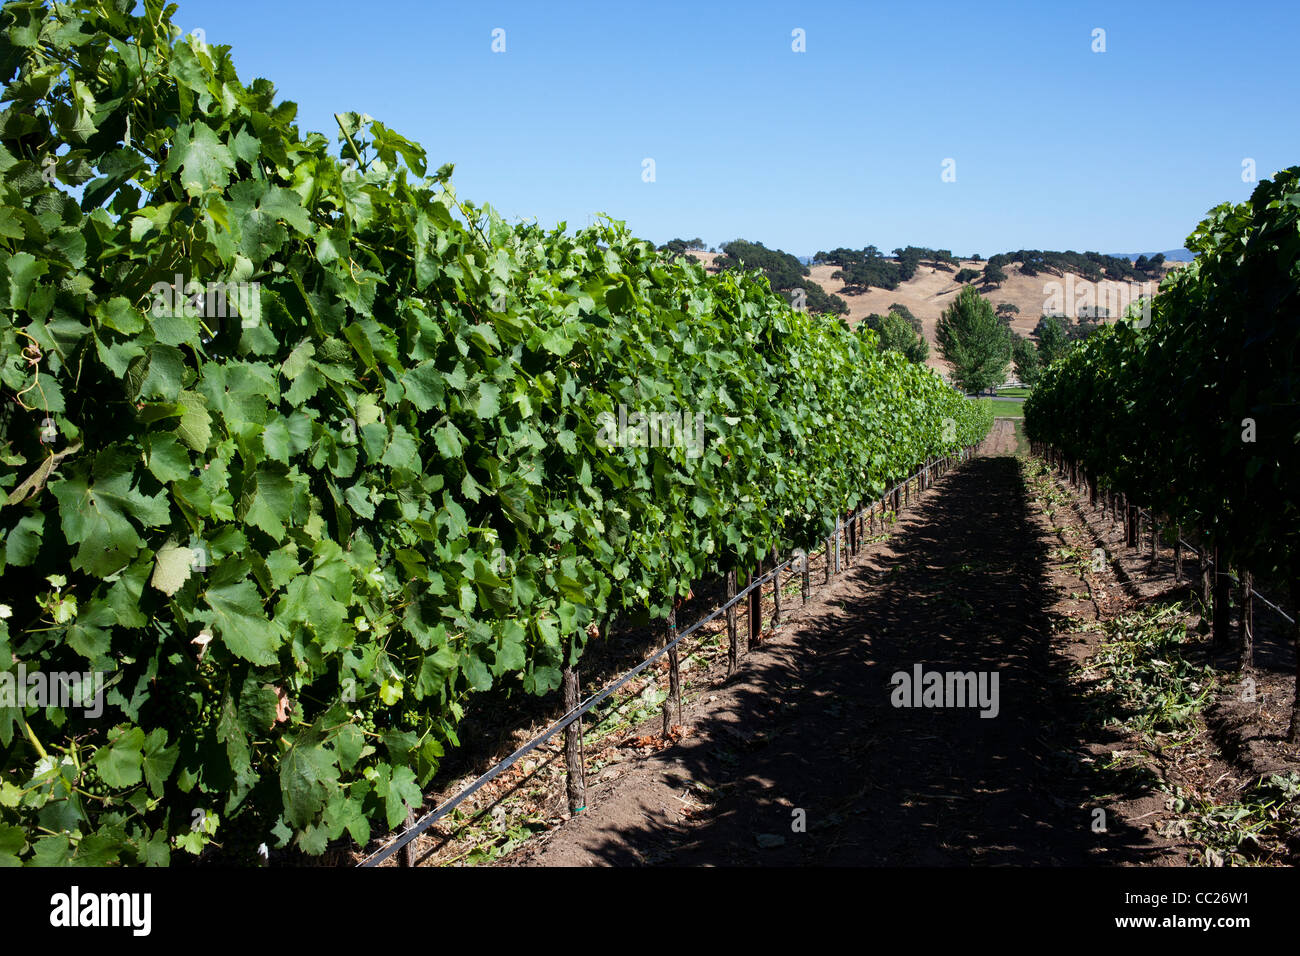 Vineyards and Winery located 30 minutes north of Santa Barbara in the Santa Ynez Valley Stock Photo